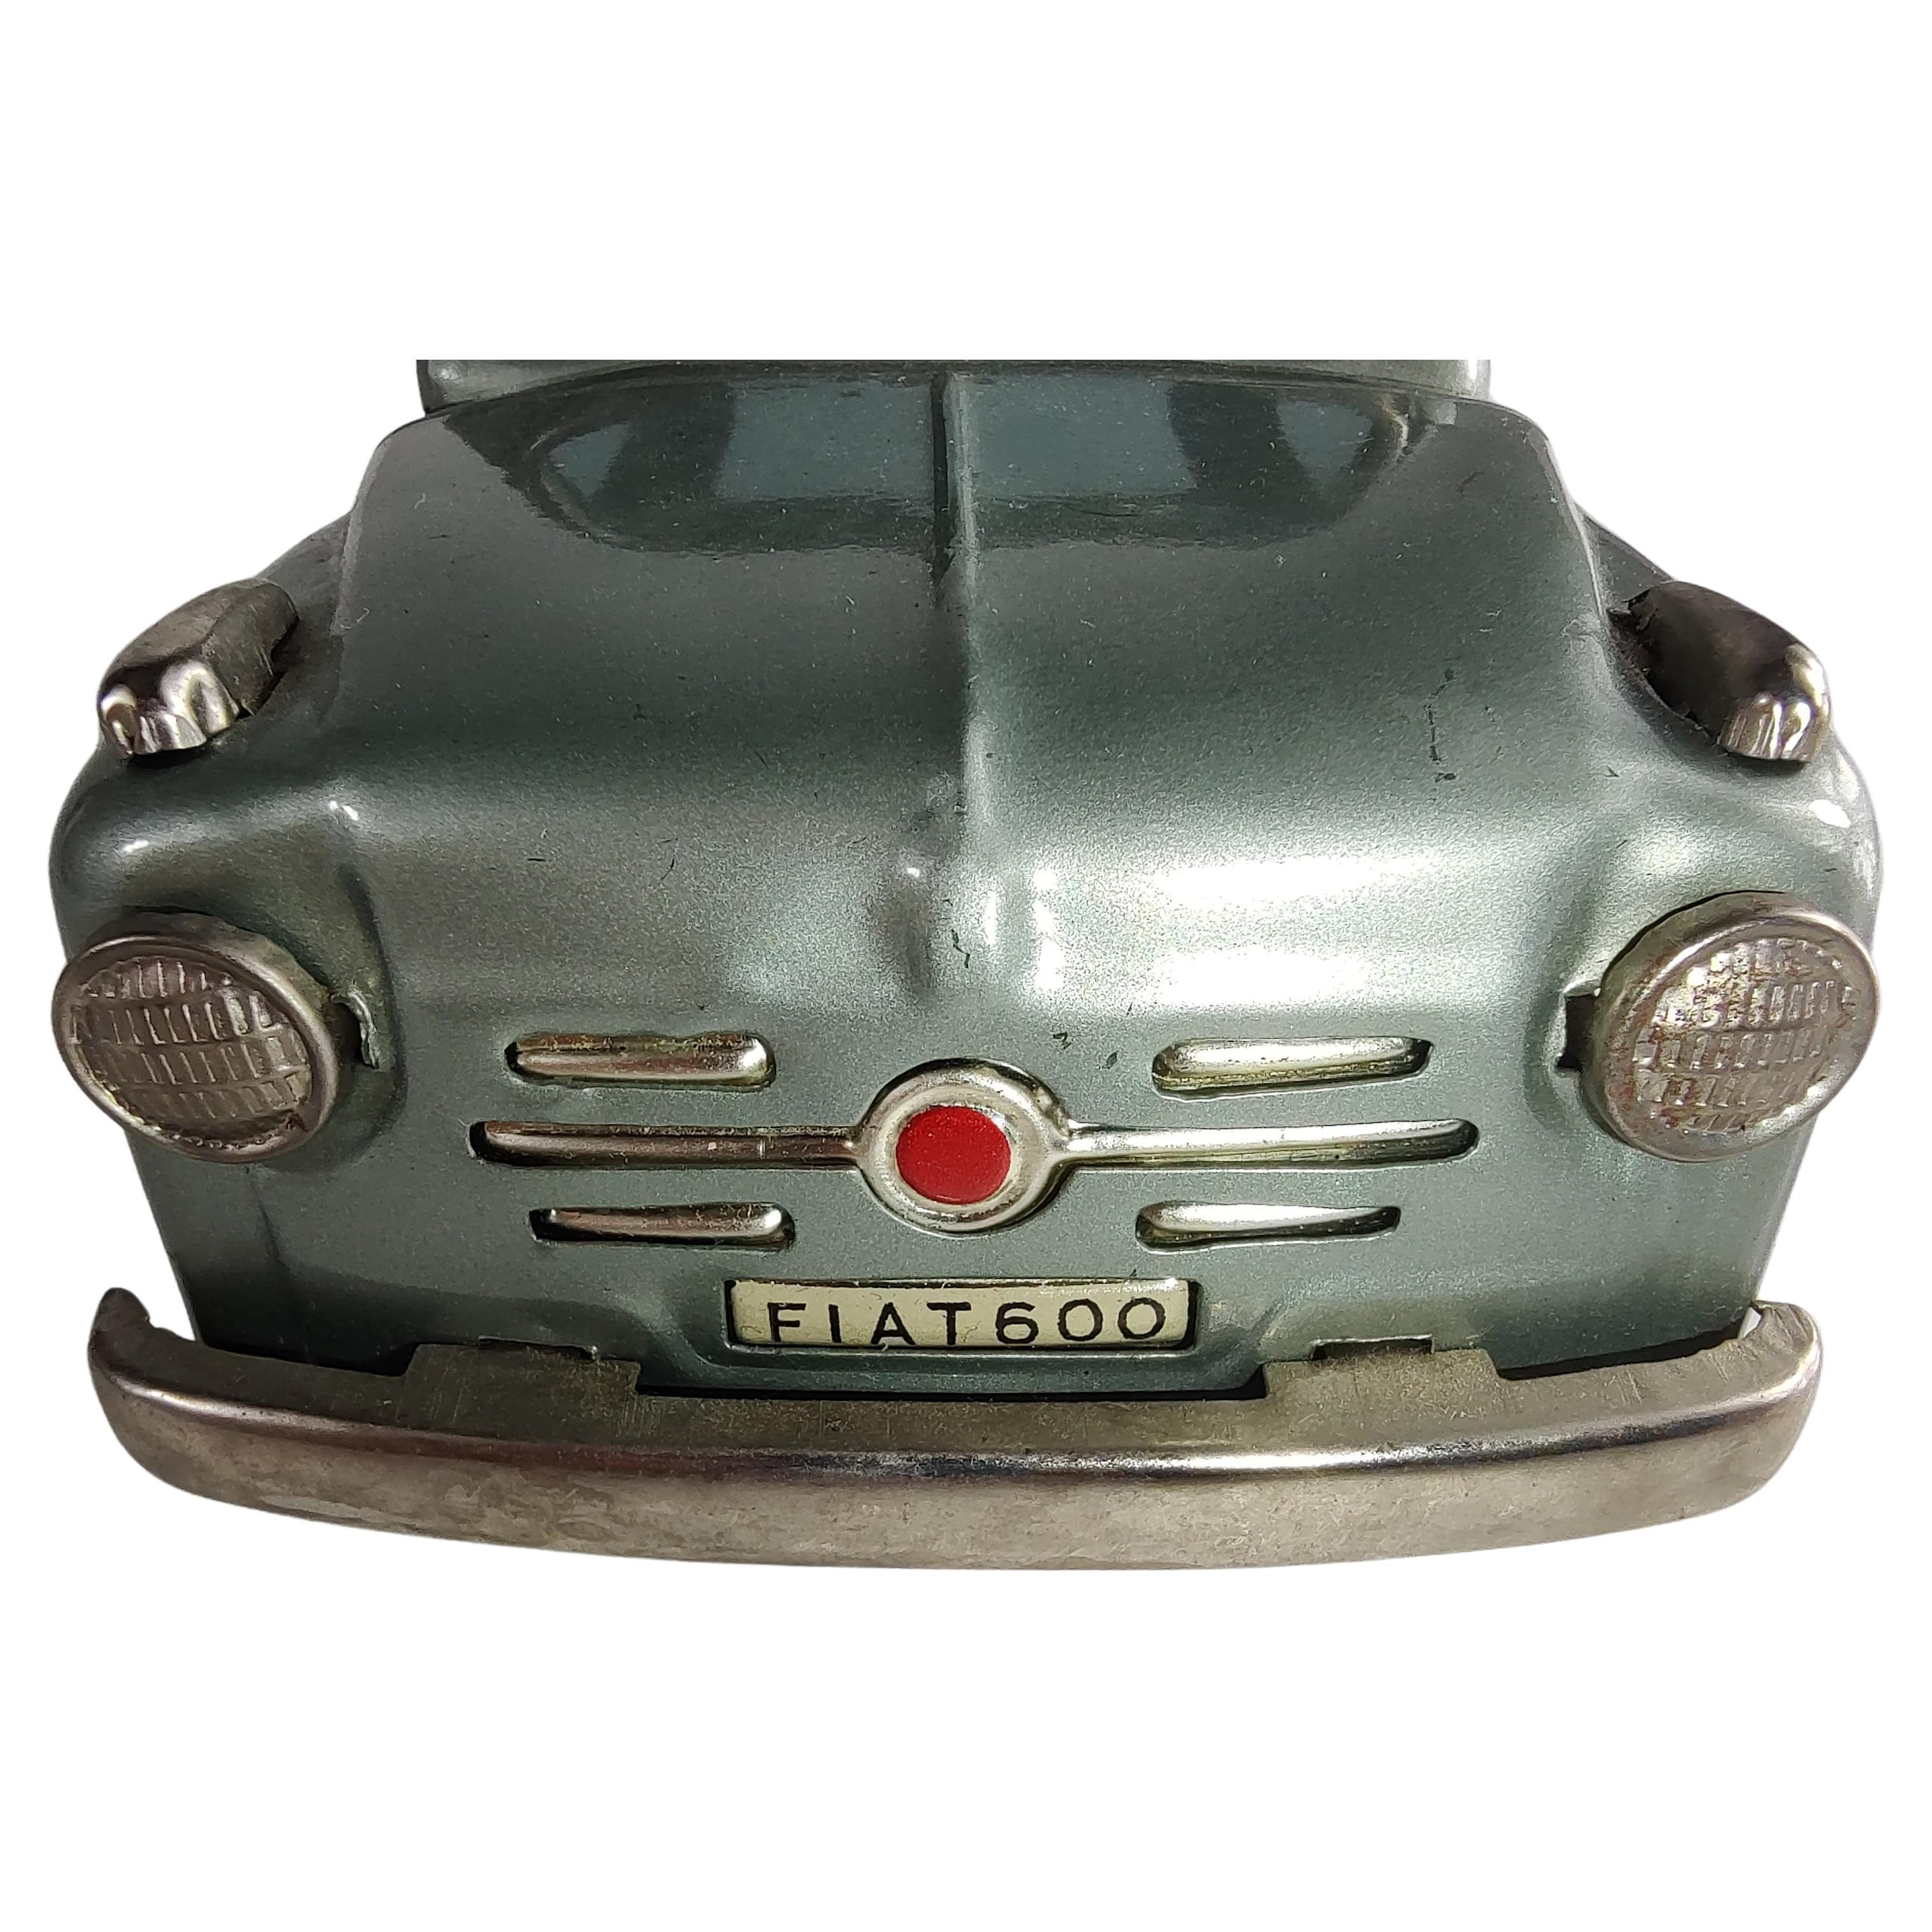 Fabulous and in near mint condition Fiat 600 with a rollback cloth convertible top. From a lot of seventeen that were probably stored from day one, and never played with. Made by Bandai I believe it's a 1958 model. Friction works great. Top rolls